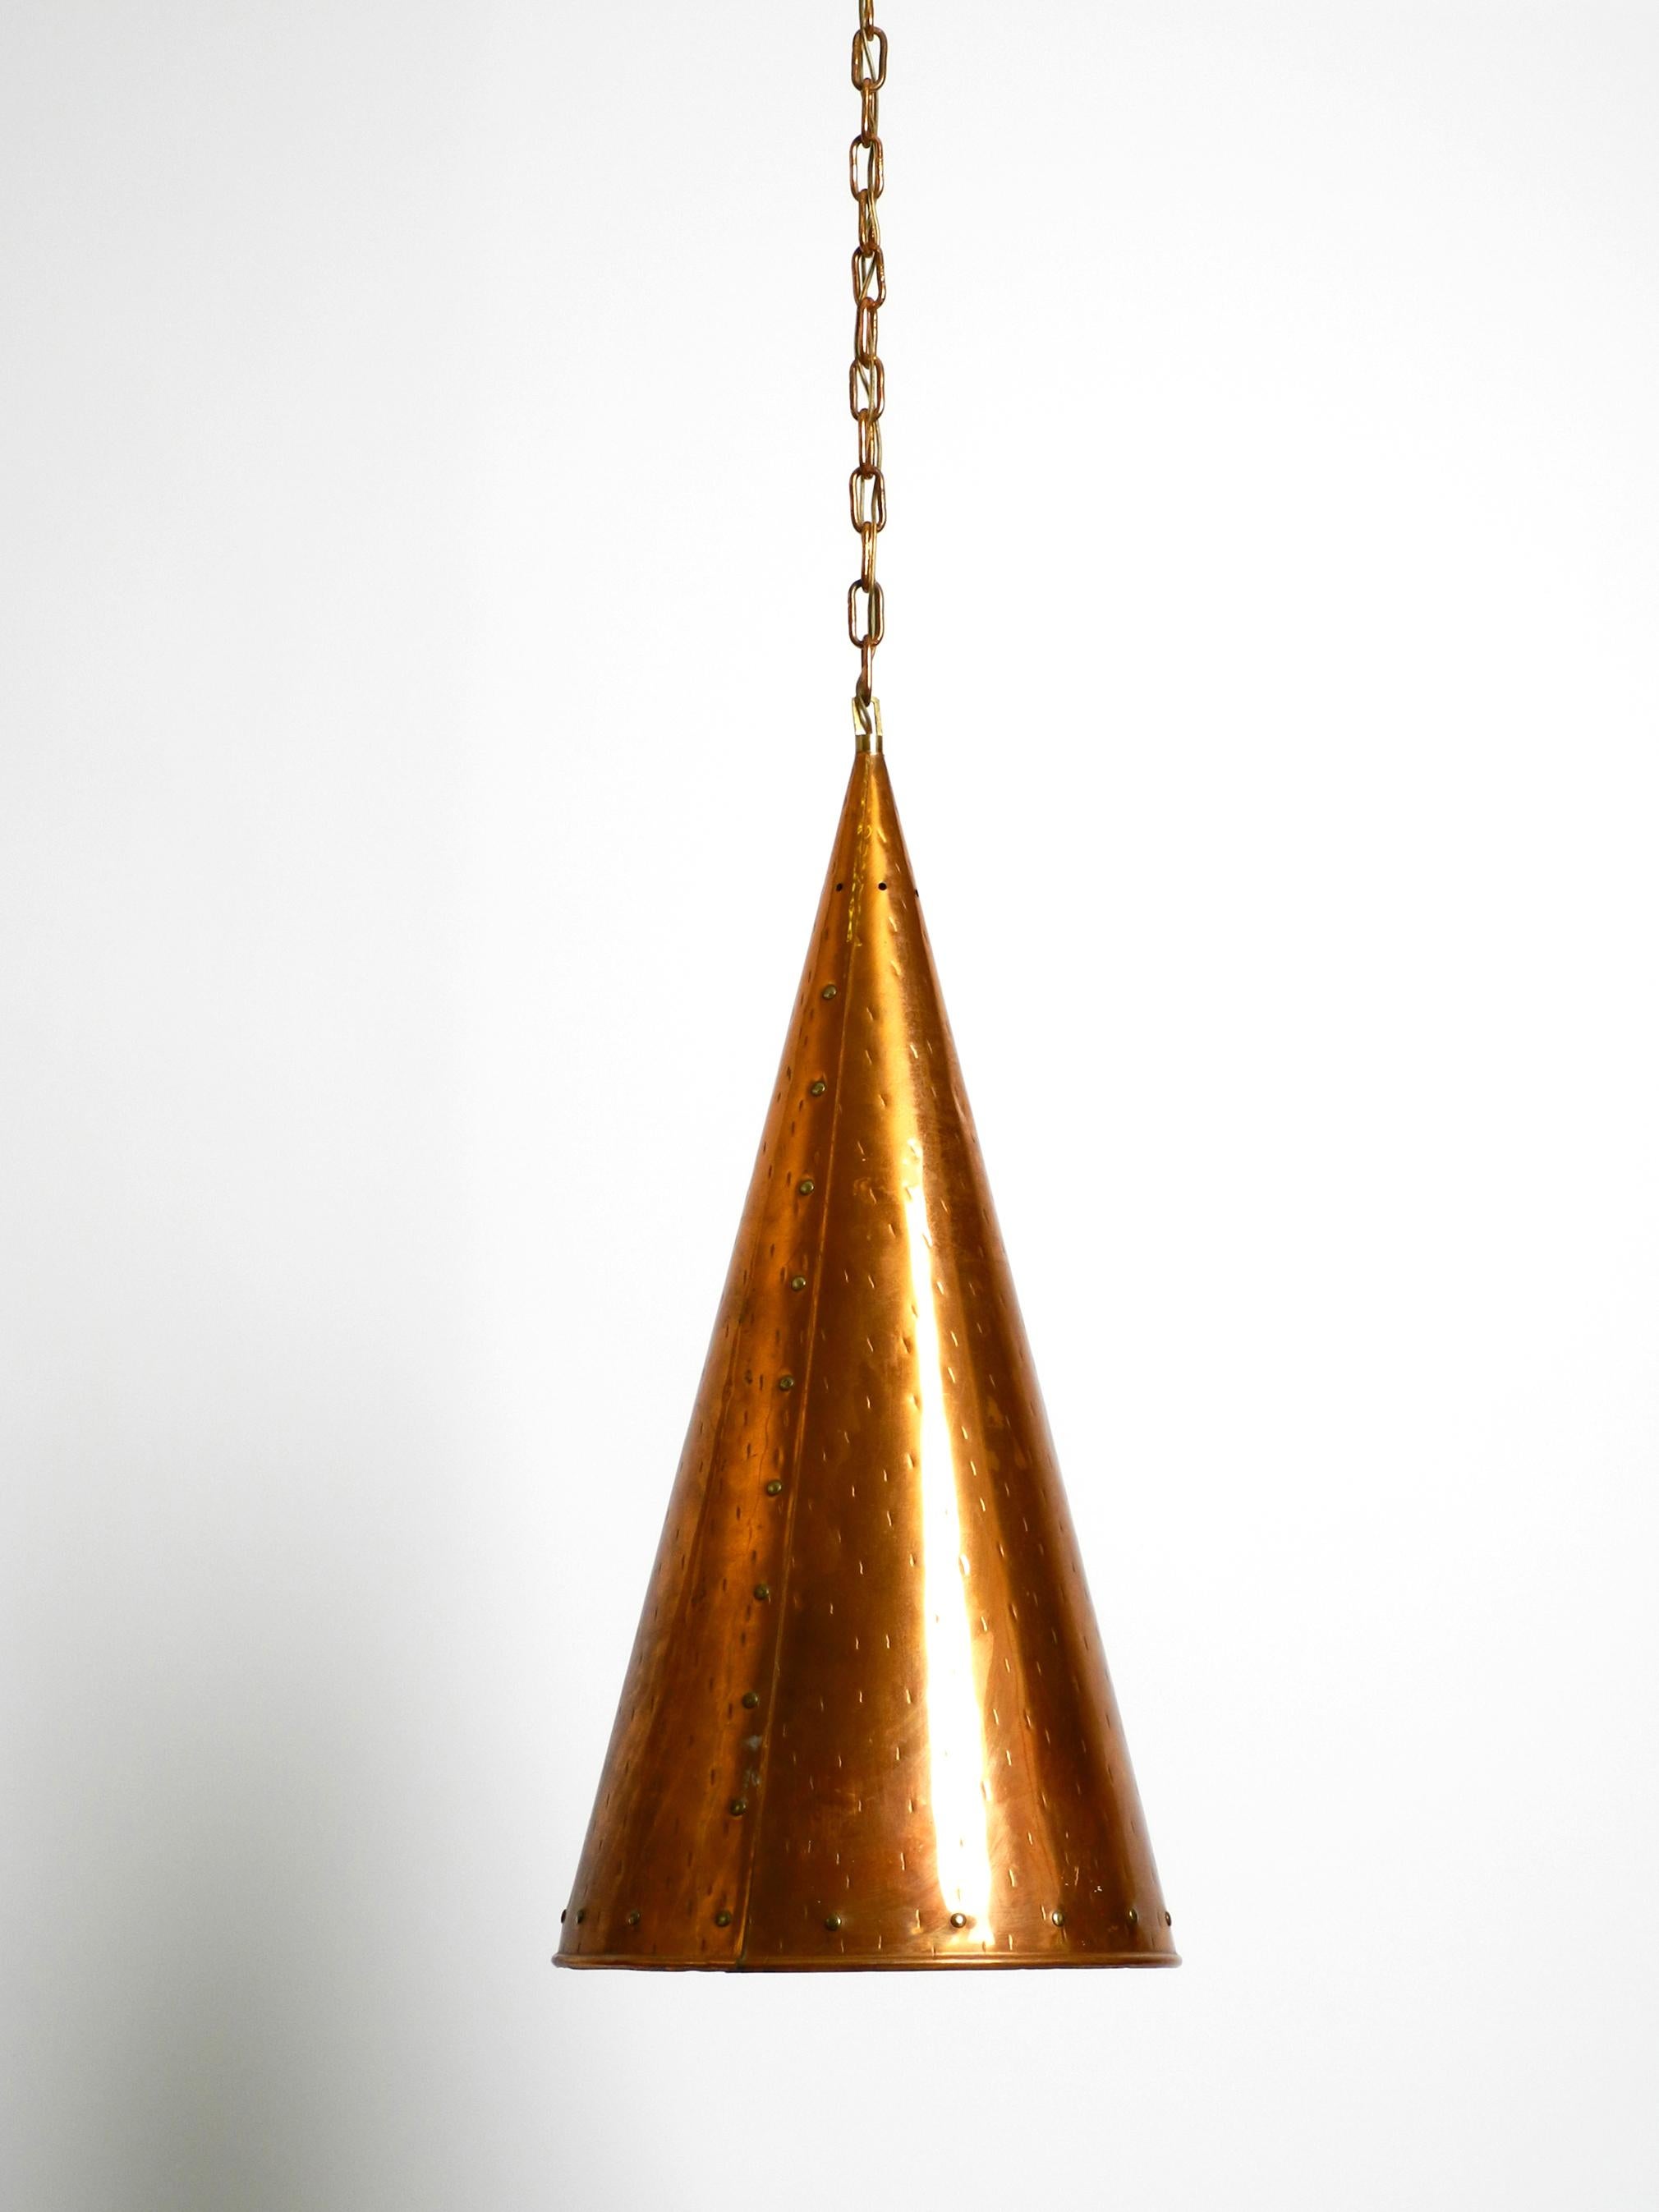 Beautiful rare huge copper pendant lamp from TH. VALENTINER Copenhagen.
Great minimalist design in the shape of a cone. Made in Denmark.
Very good vintage condition, no damages to the lamp. Just a slight dent on the shade at the top. You can see